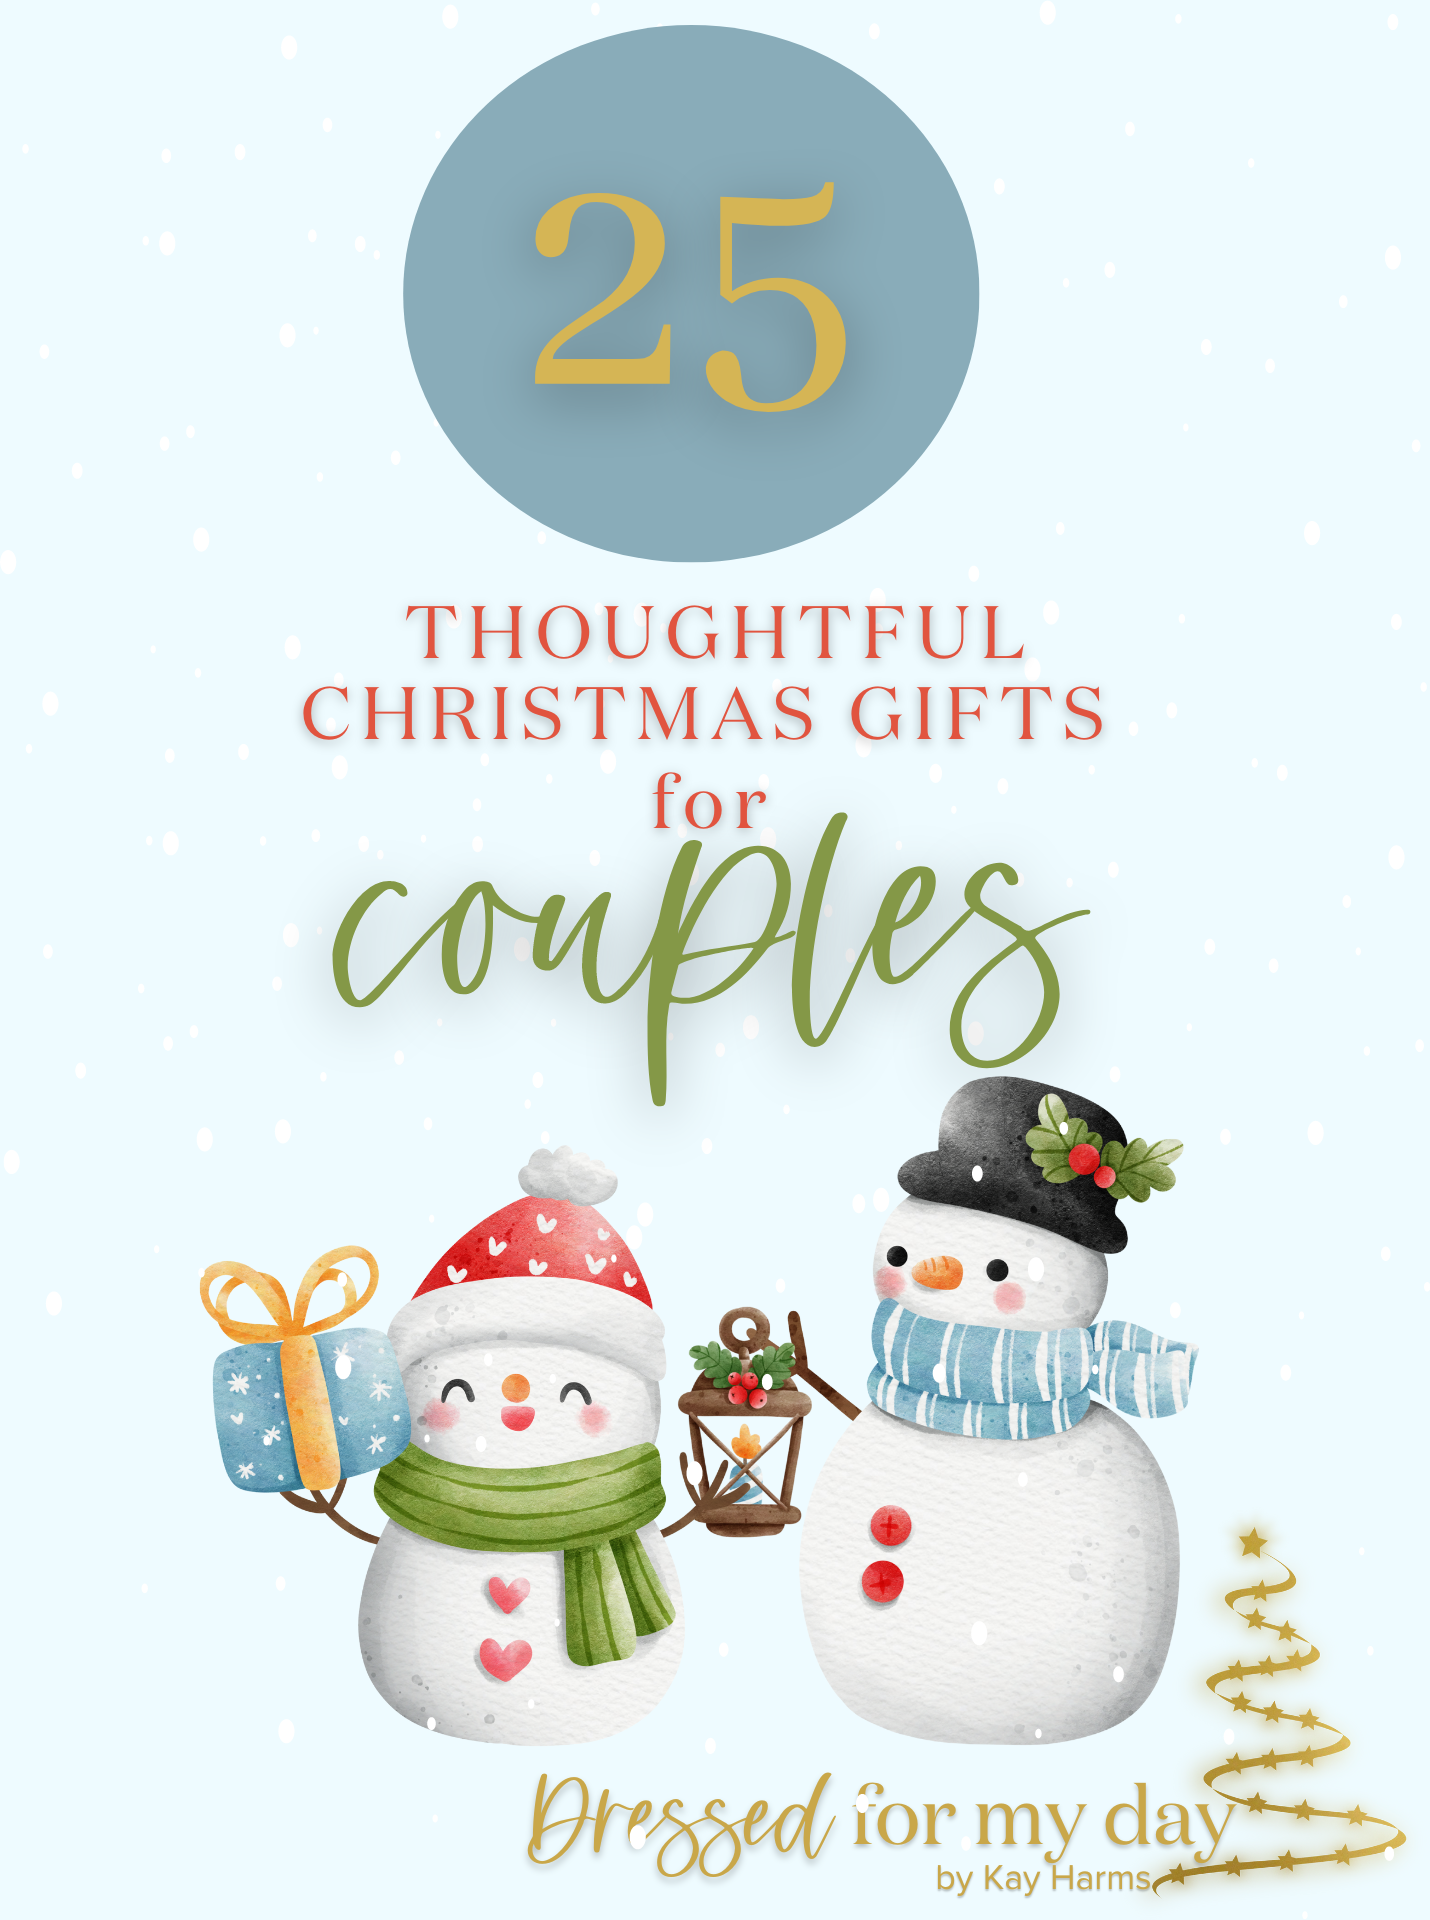 Thoughtful Christmas Gifts for Couples